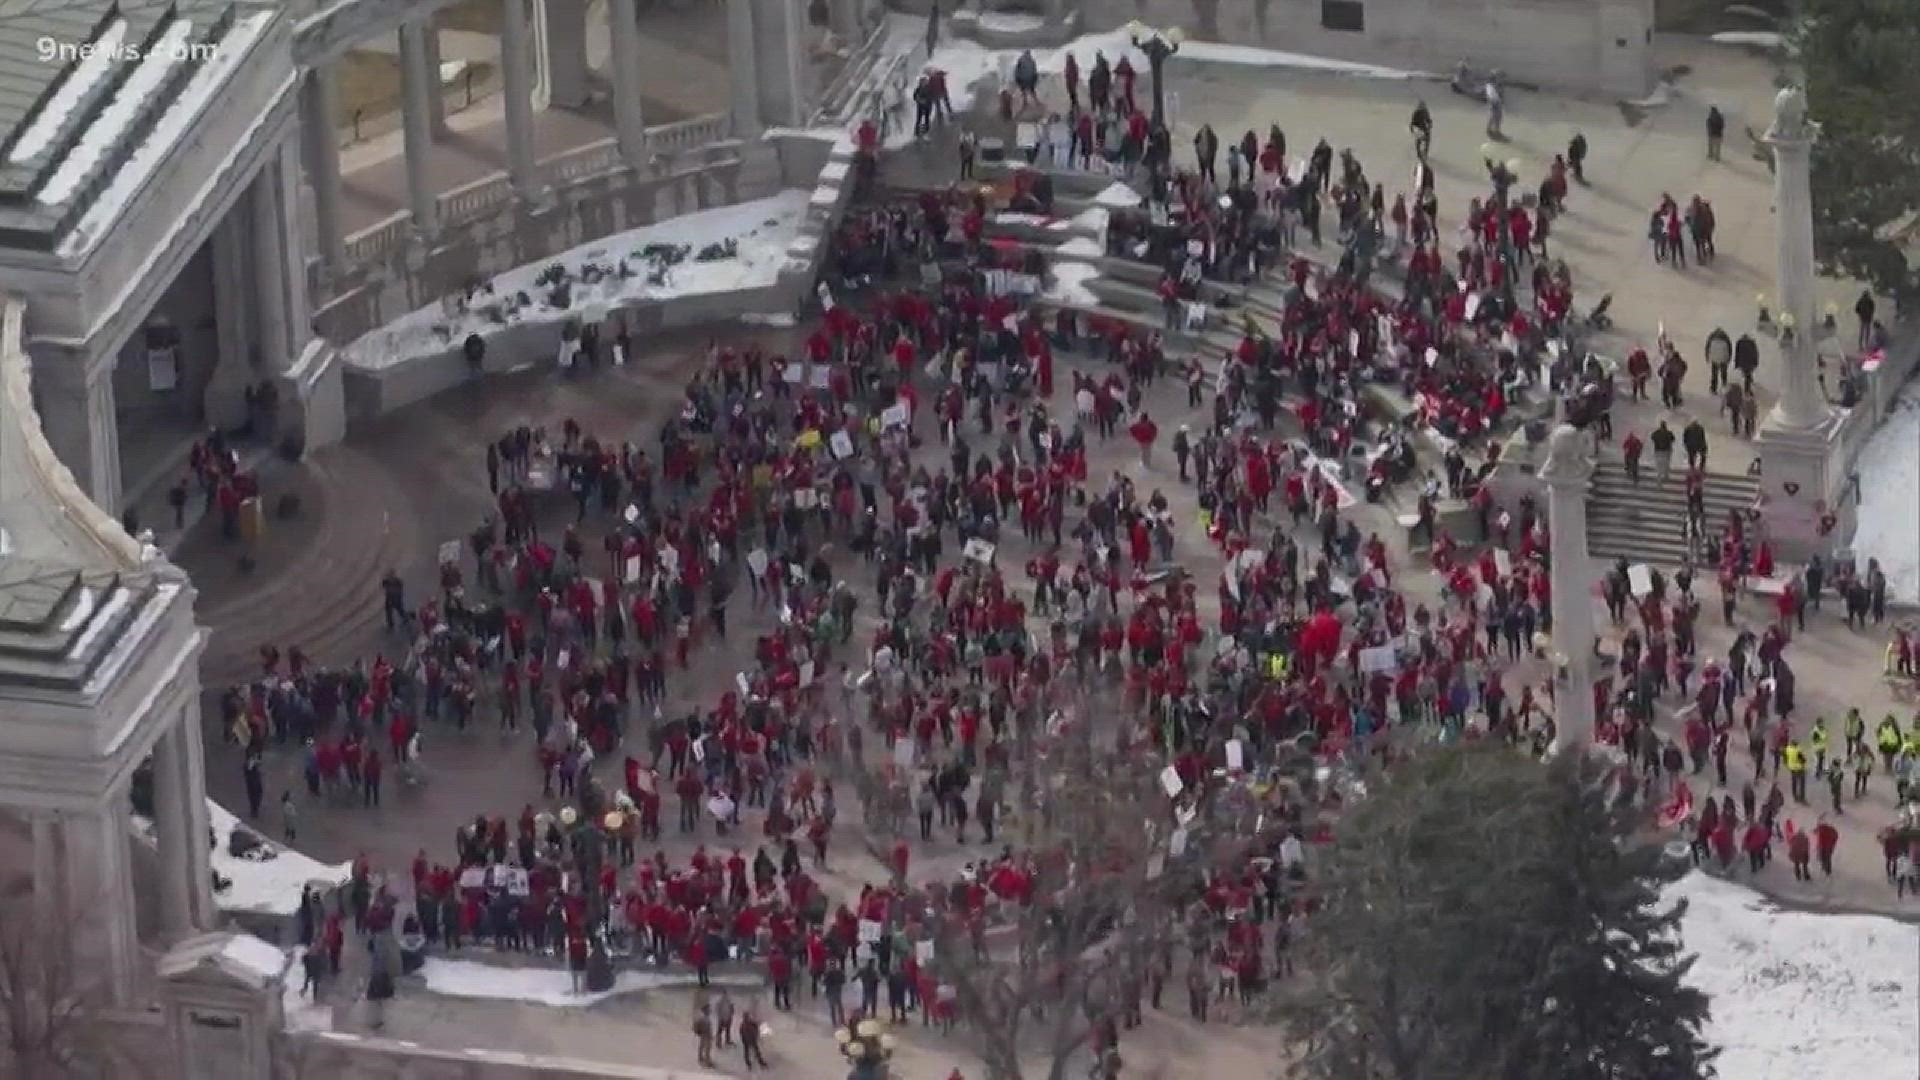 For the third straight day, Denver teachers rallied for higher pay. They were at Civic Center Park again Wednesday afternoon after beginning their morning picketing outside of East High School.